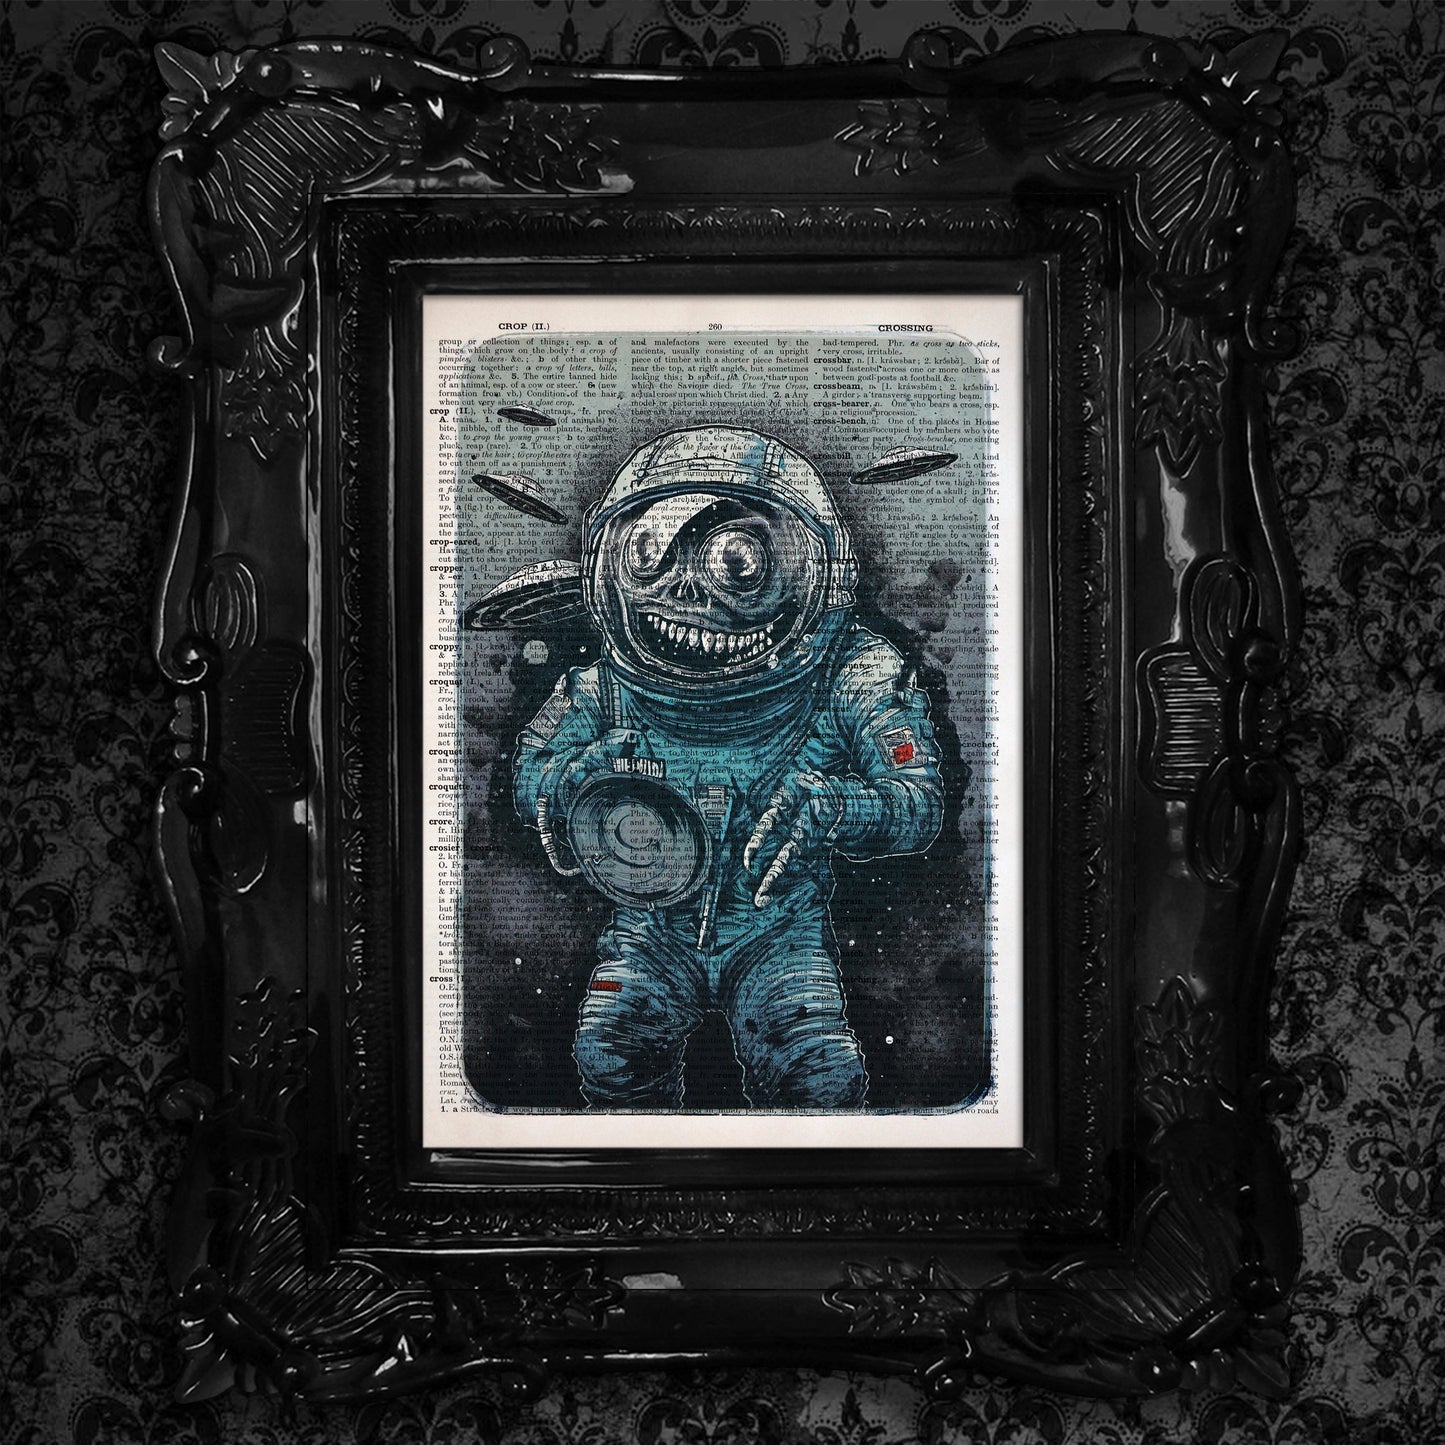 The "Cosmic Plague" series blends sci-fi horror with vintage charm, printed on upcycled dictionary pages.